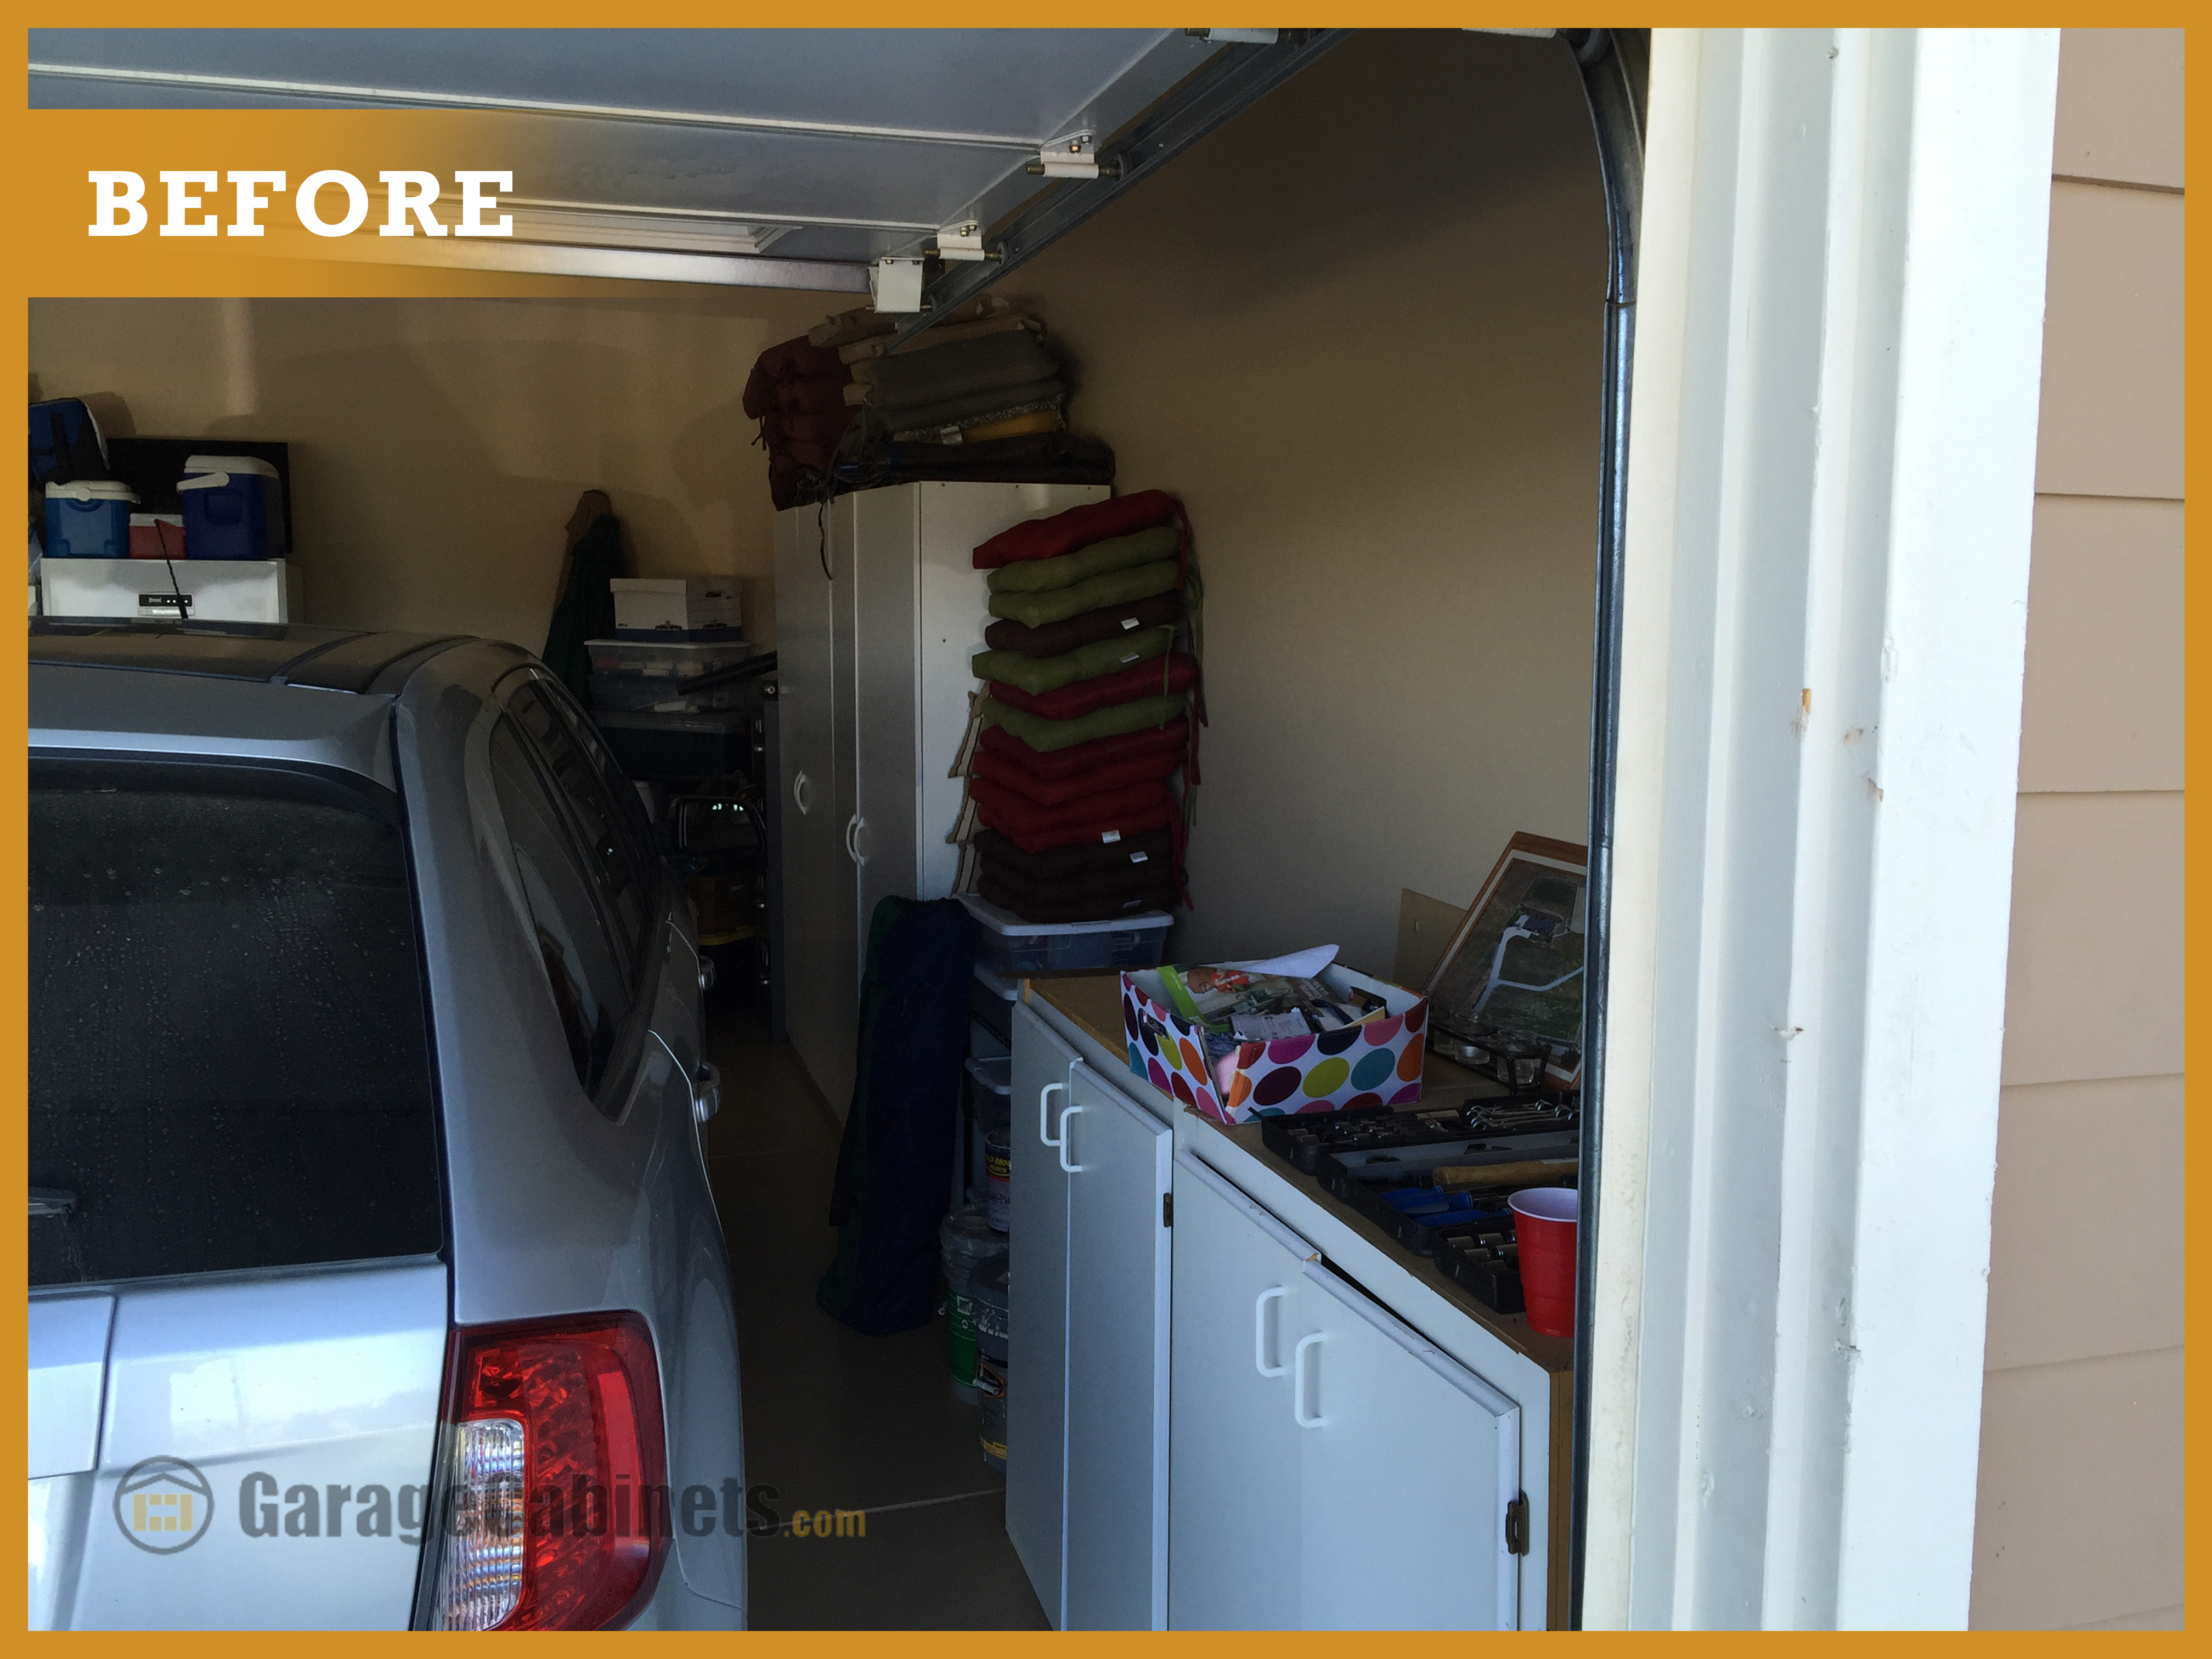 Garage storage solutions are needed here. 